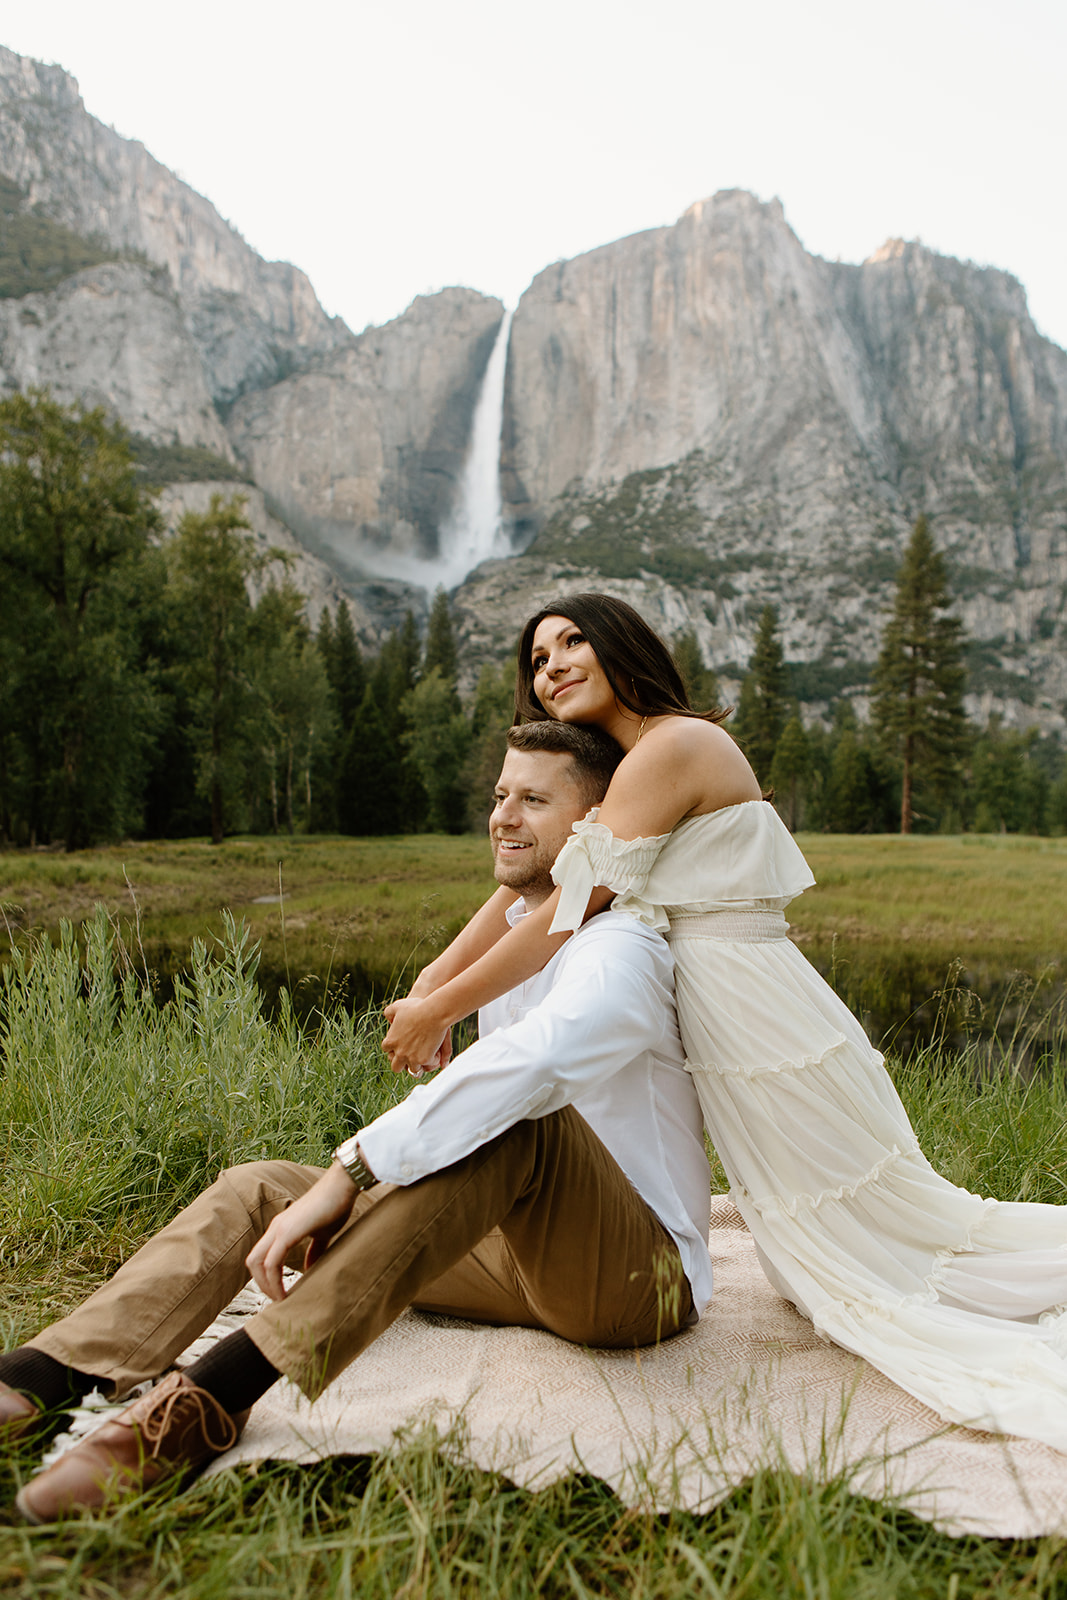 Jessica and Mike taking engagement photos in Yosemite valley with Yosemite Valley falls as the backdrop